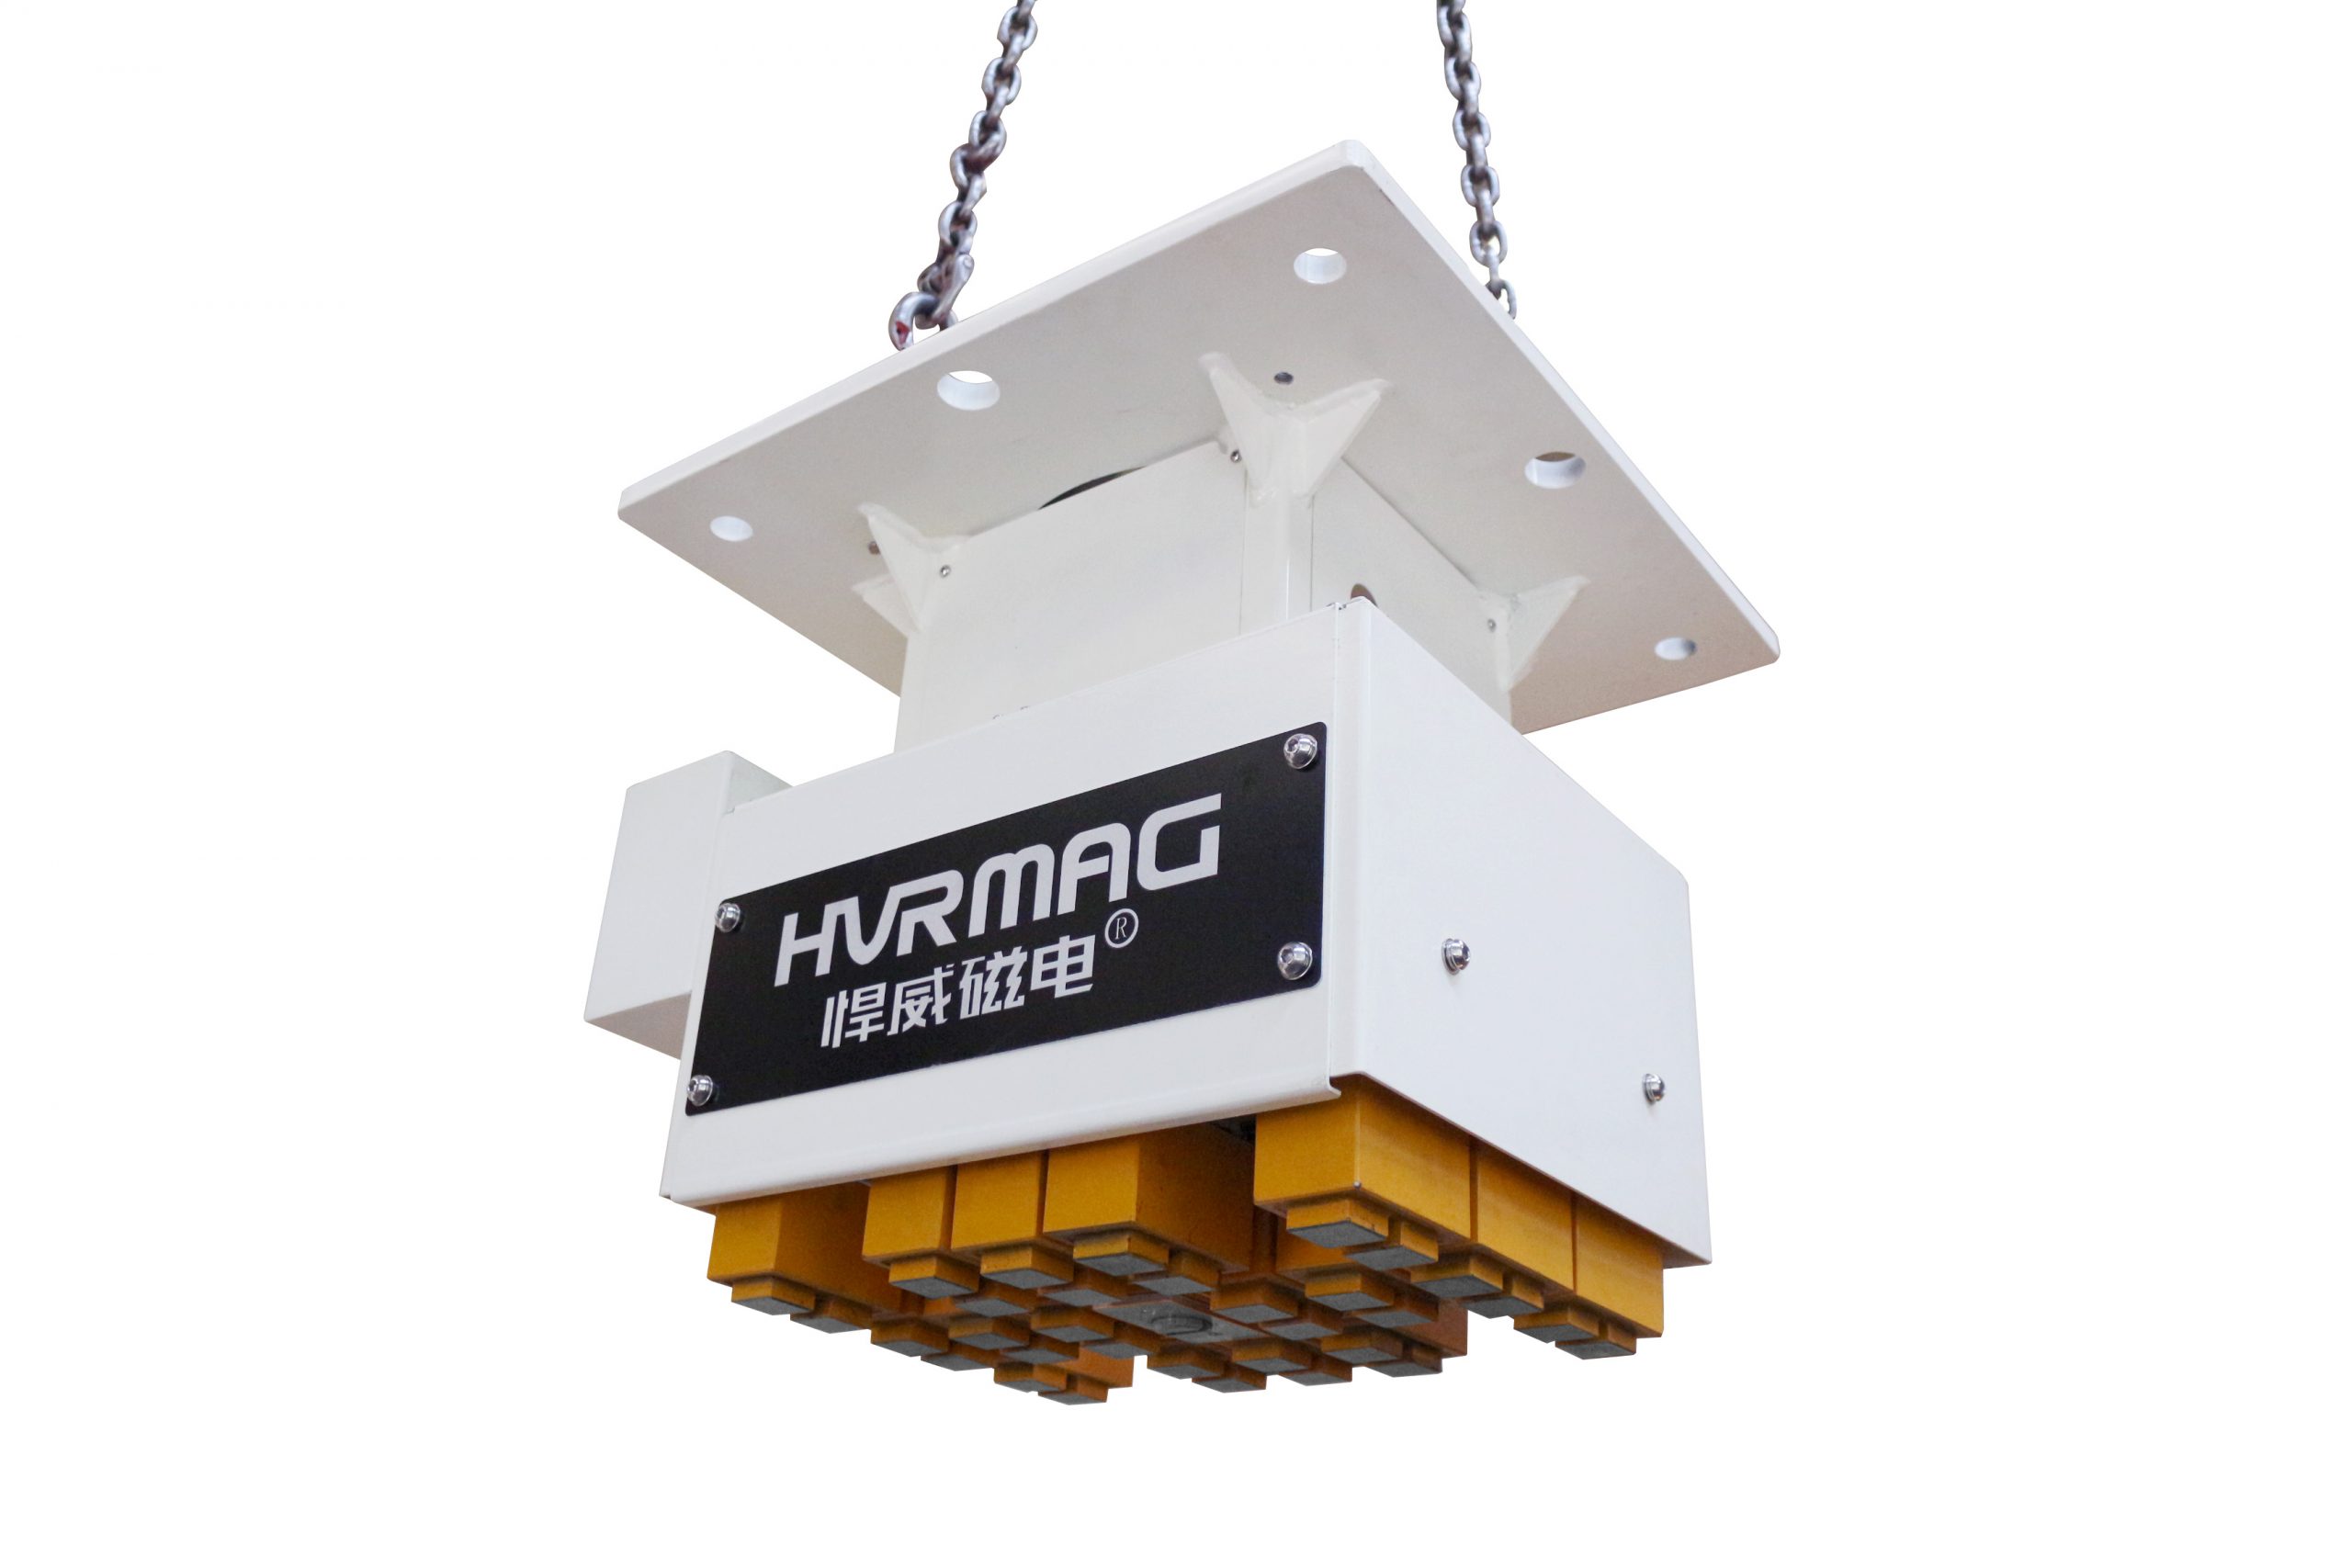 magnetic type of robot gripper - designed and manufactured by HVR MAG